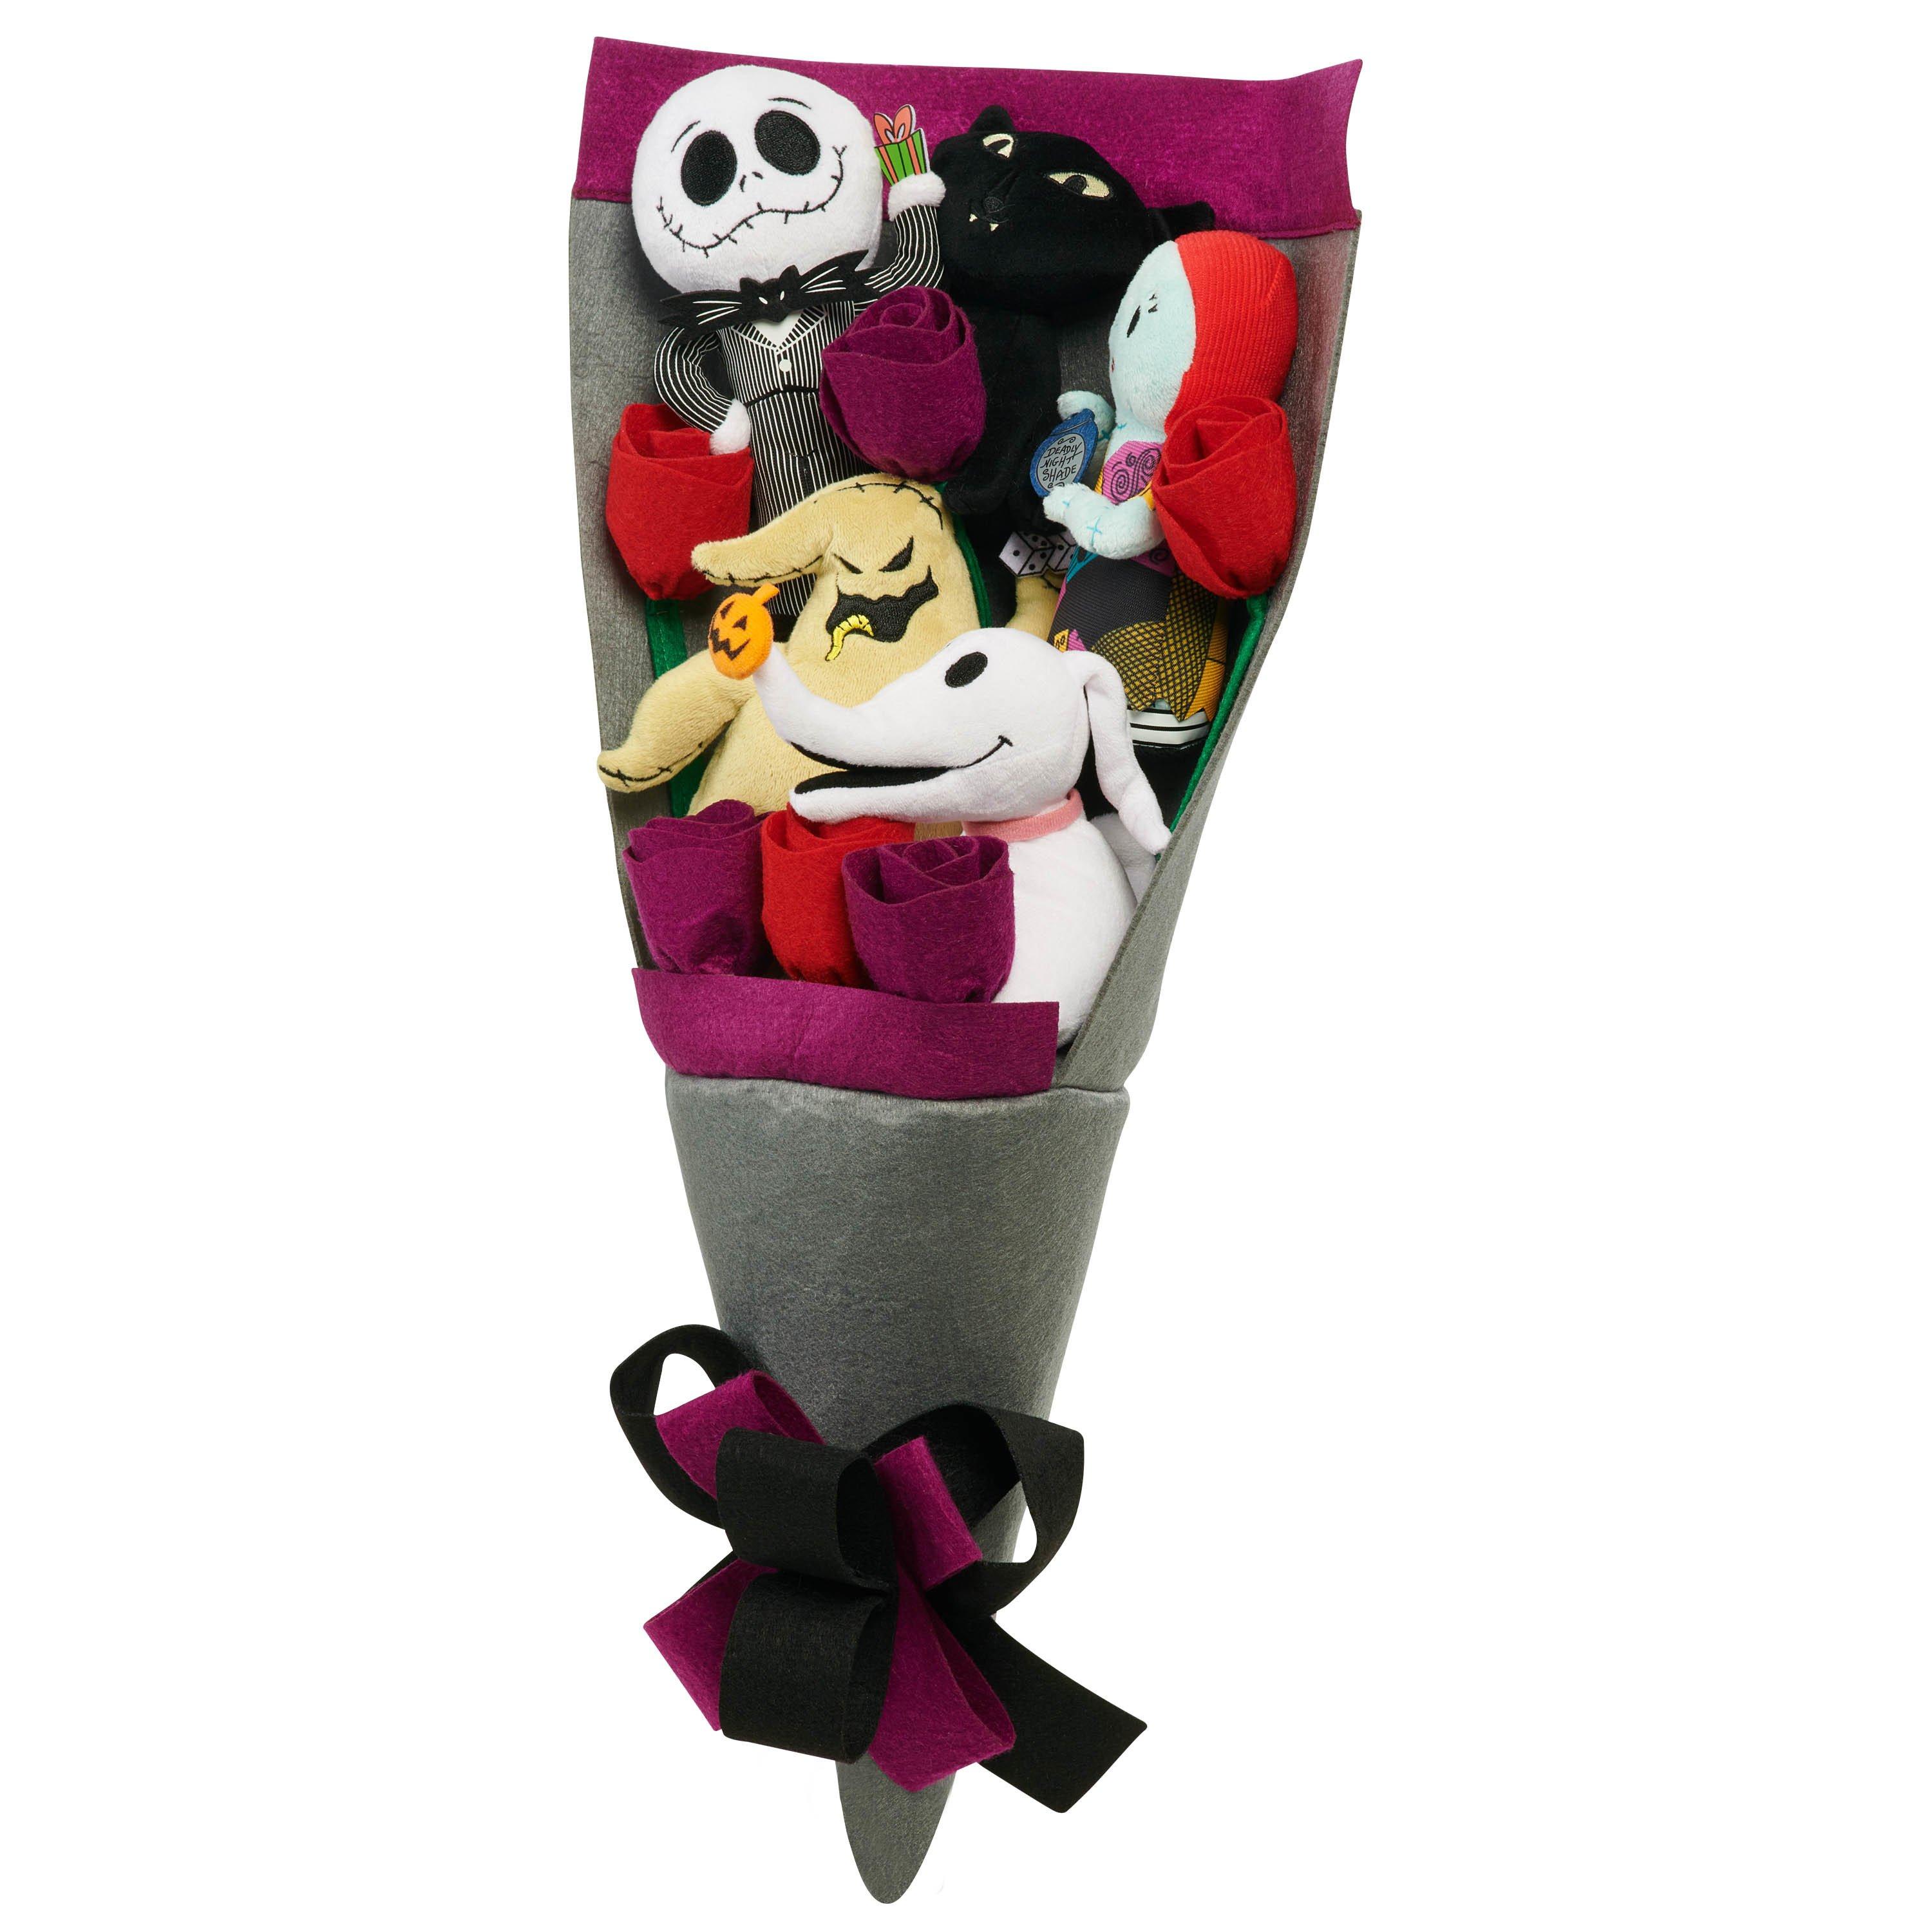 Just Play Nightmare Before Christmas Plush Bouquet GameStop Exclusive